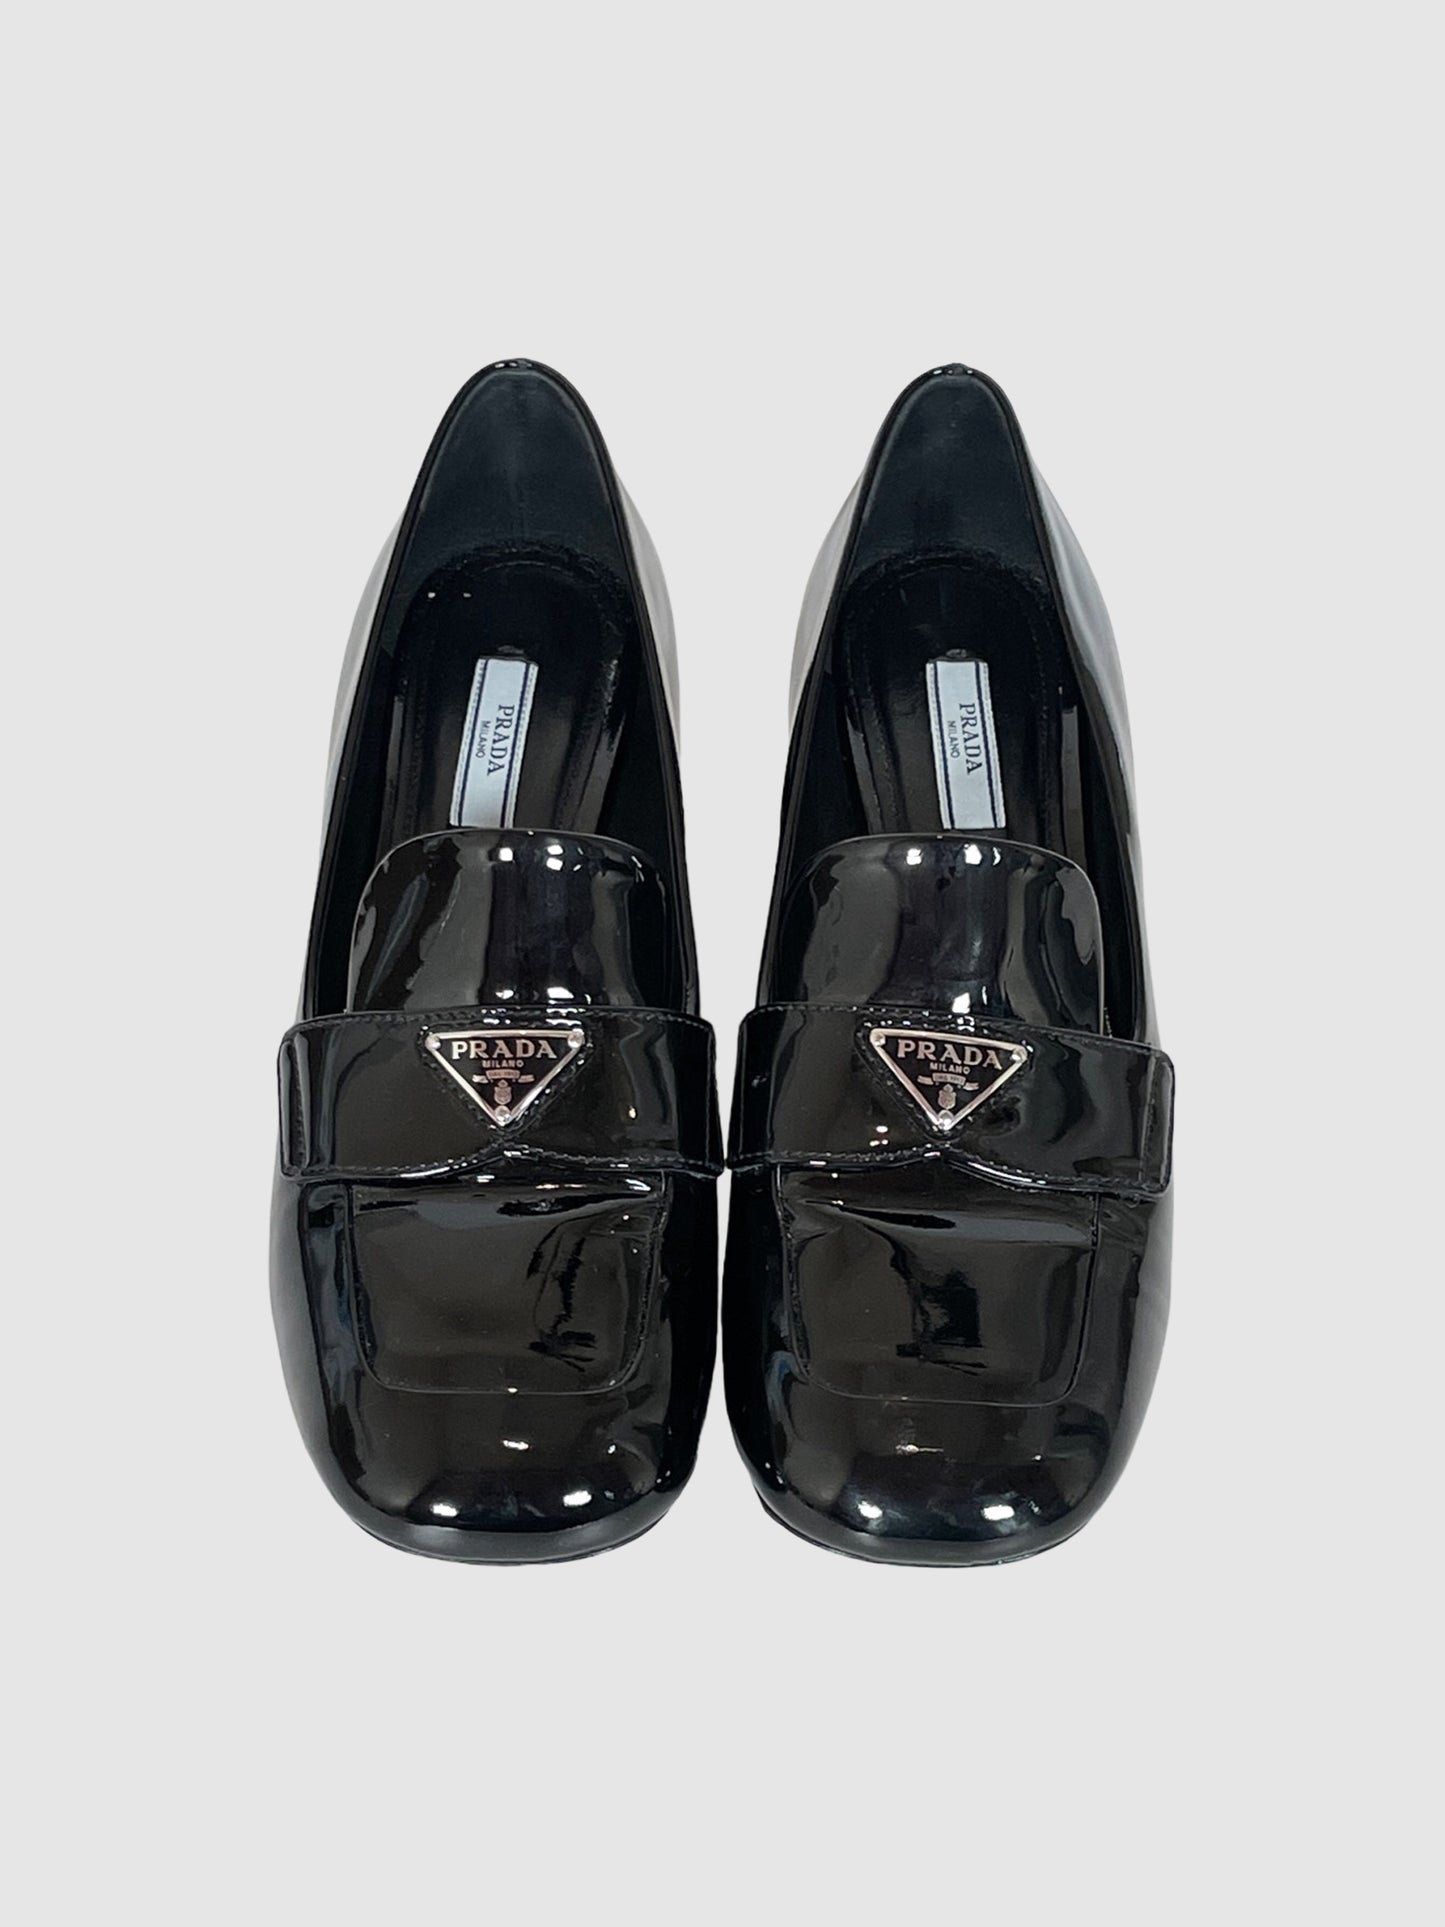 Prada Patent Leather Loafers - Size 39